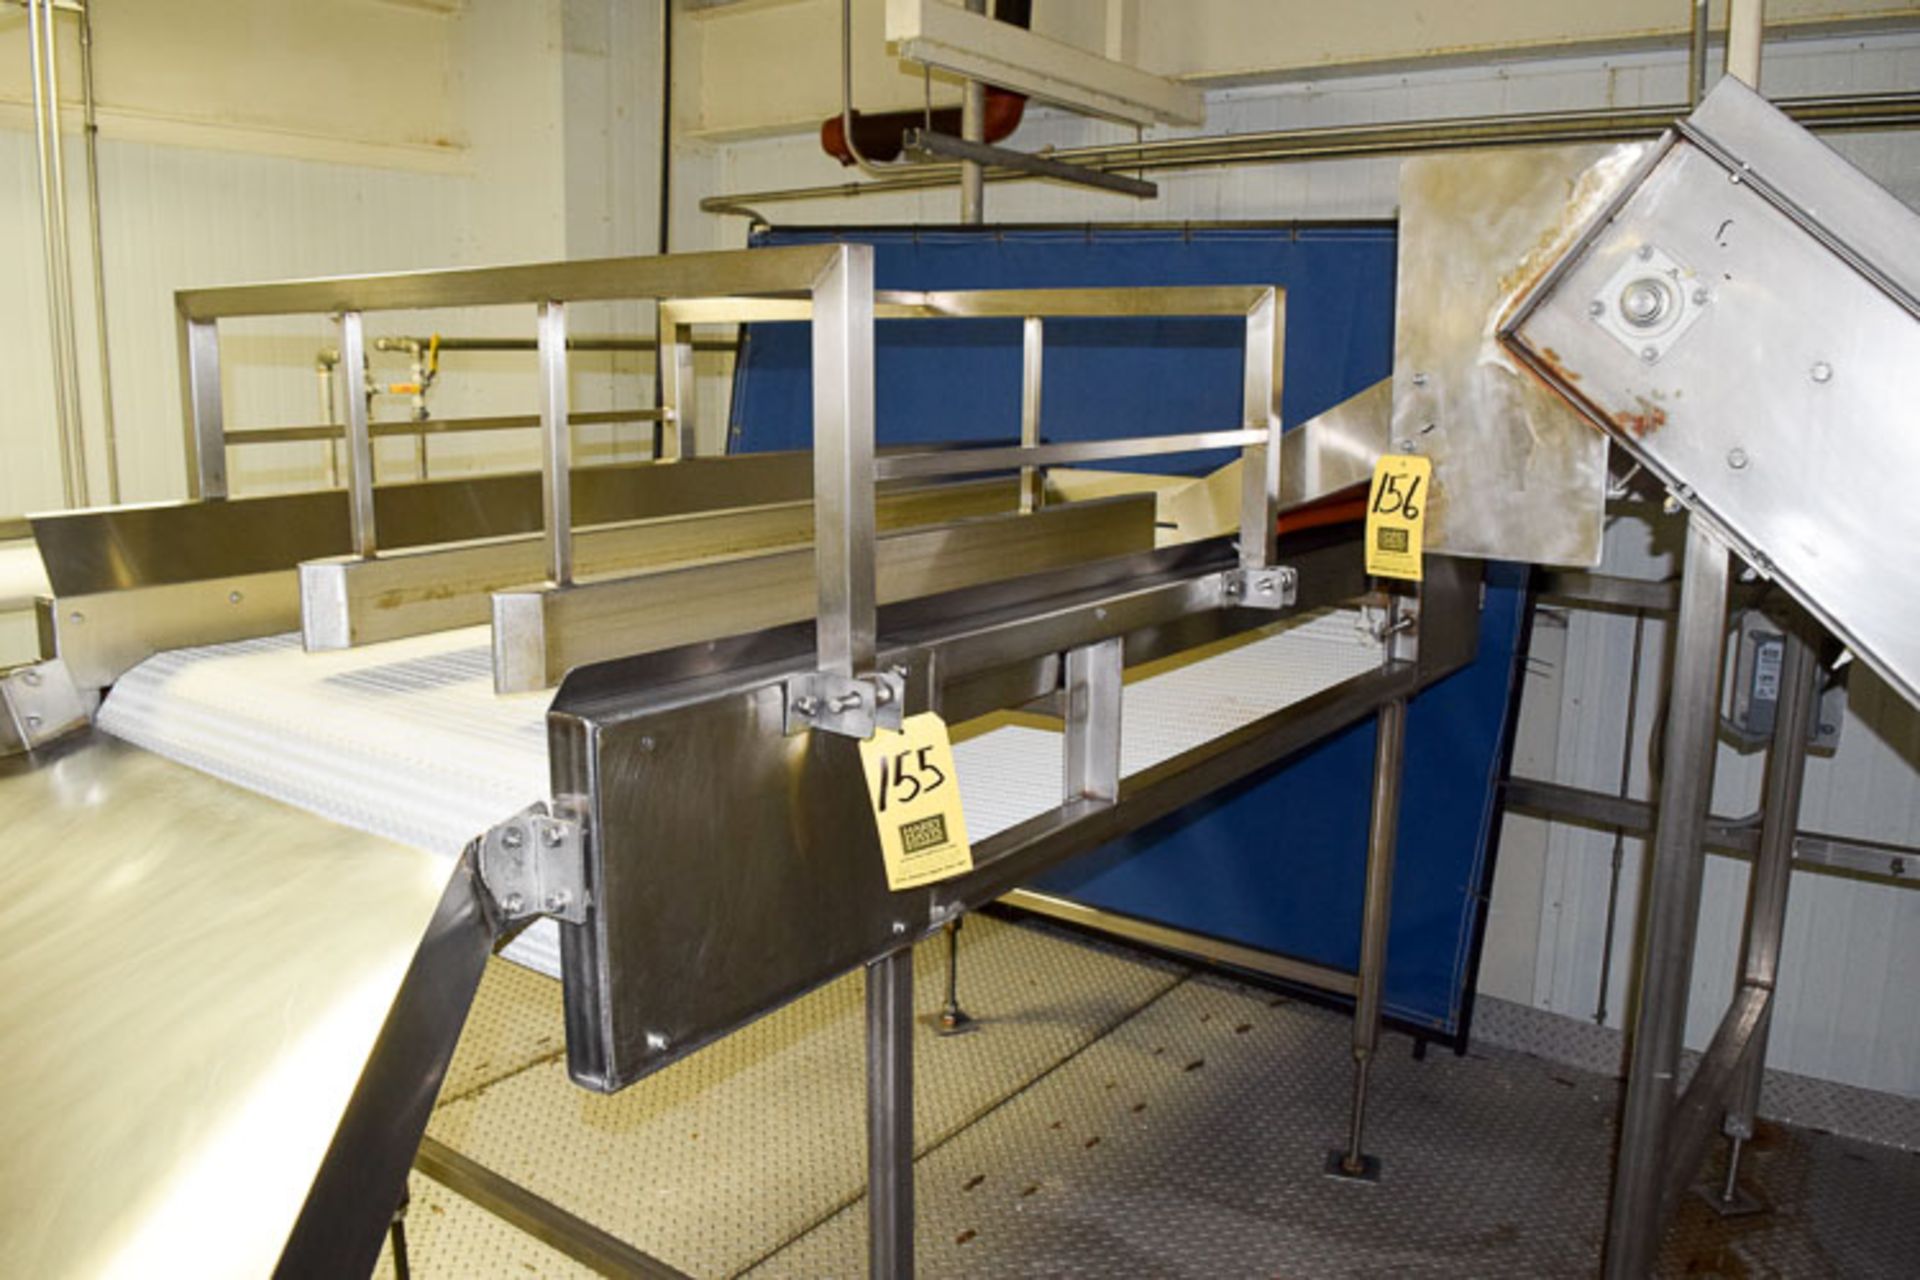 34"W x 84"L, S/S Frame Product Conveyor with Interlox Belt and Drive - Rigging Fee $ 500